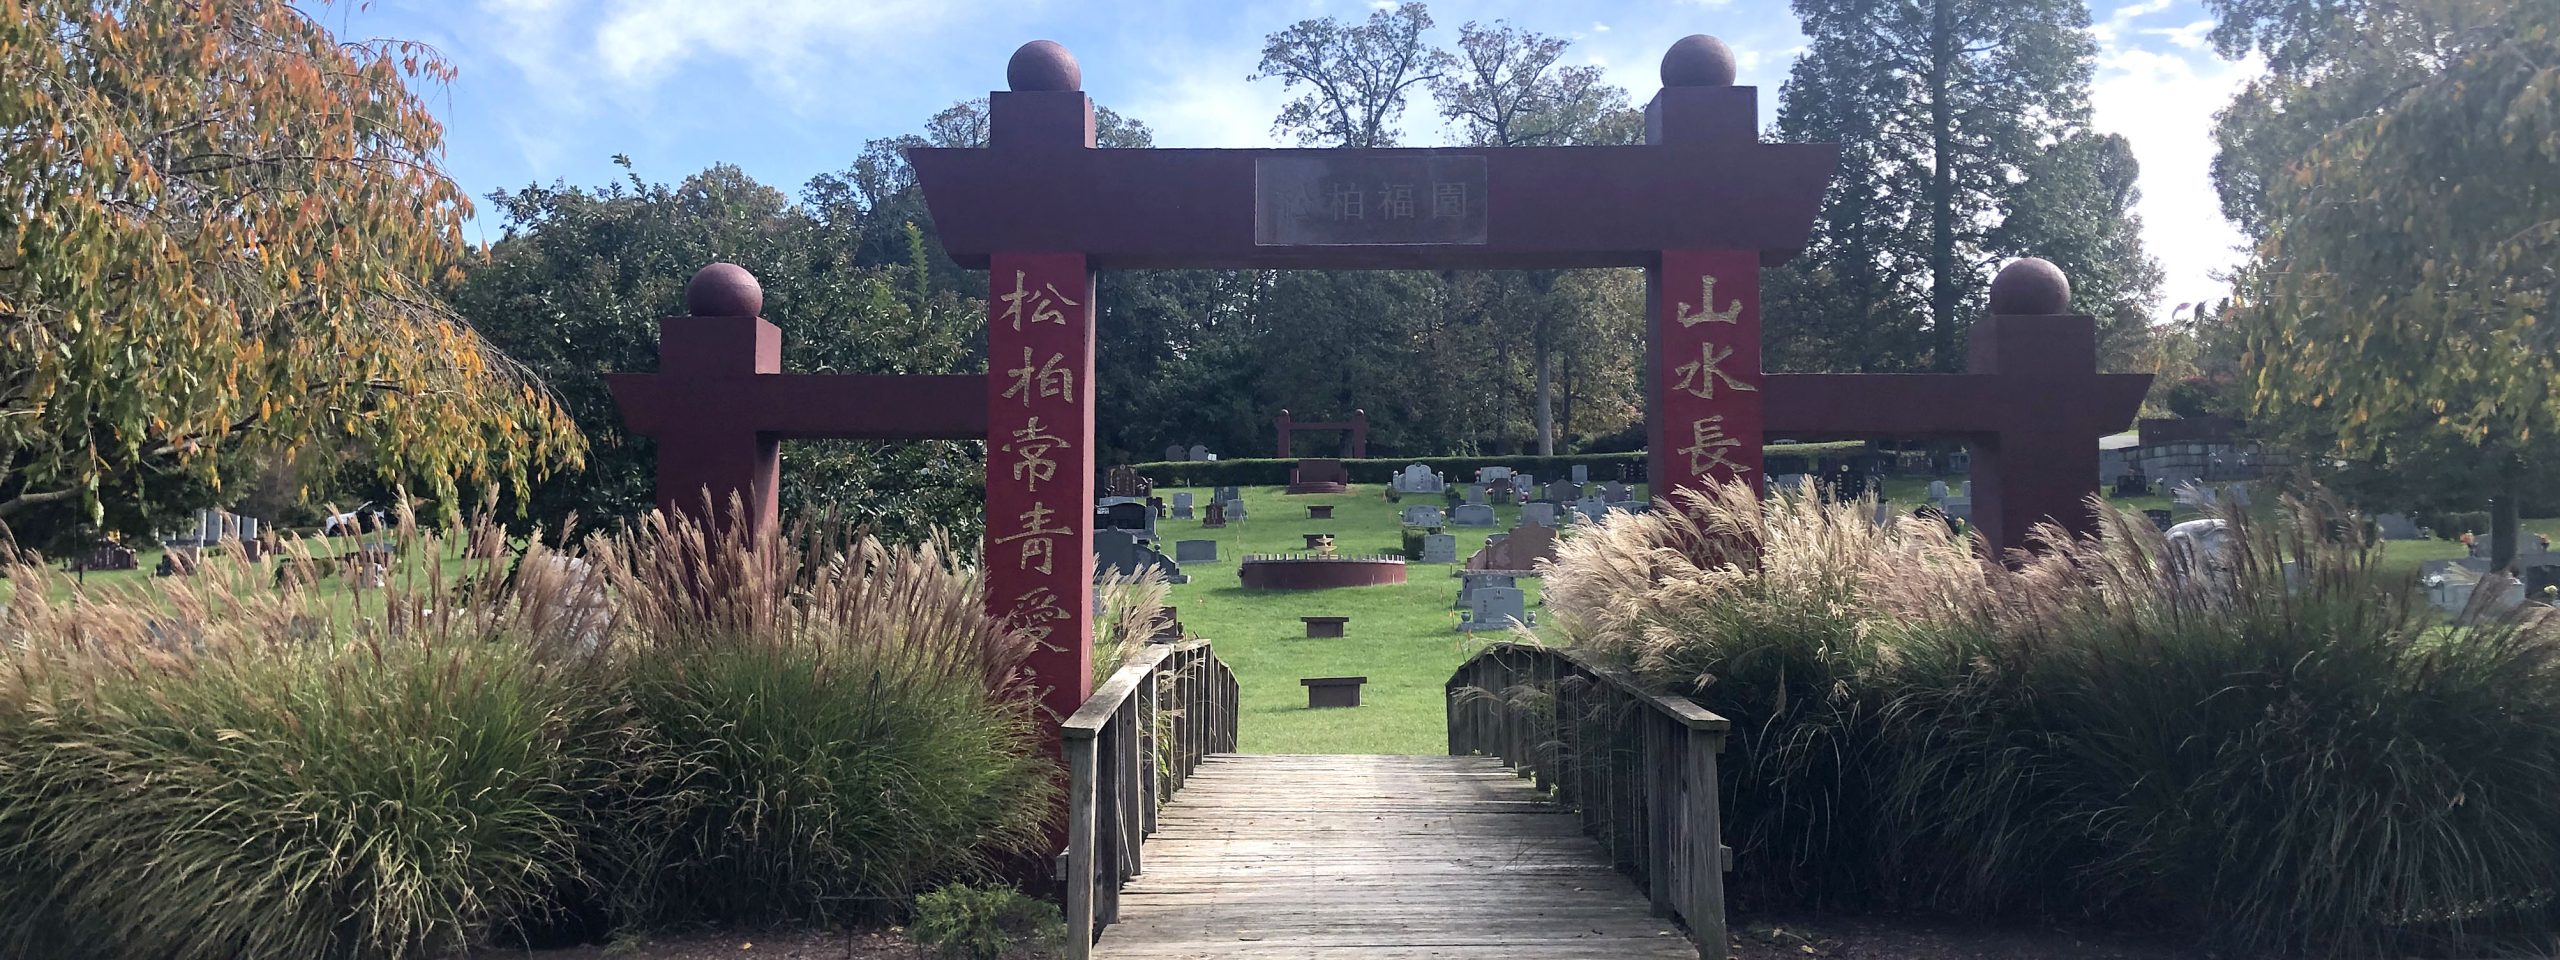 A cemetery entrance marked by a gate with Chinese text